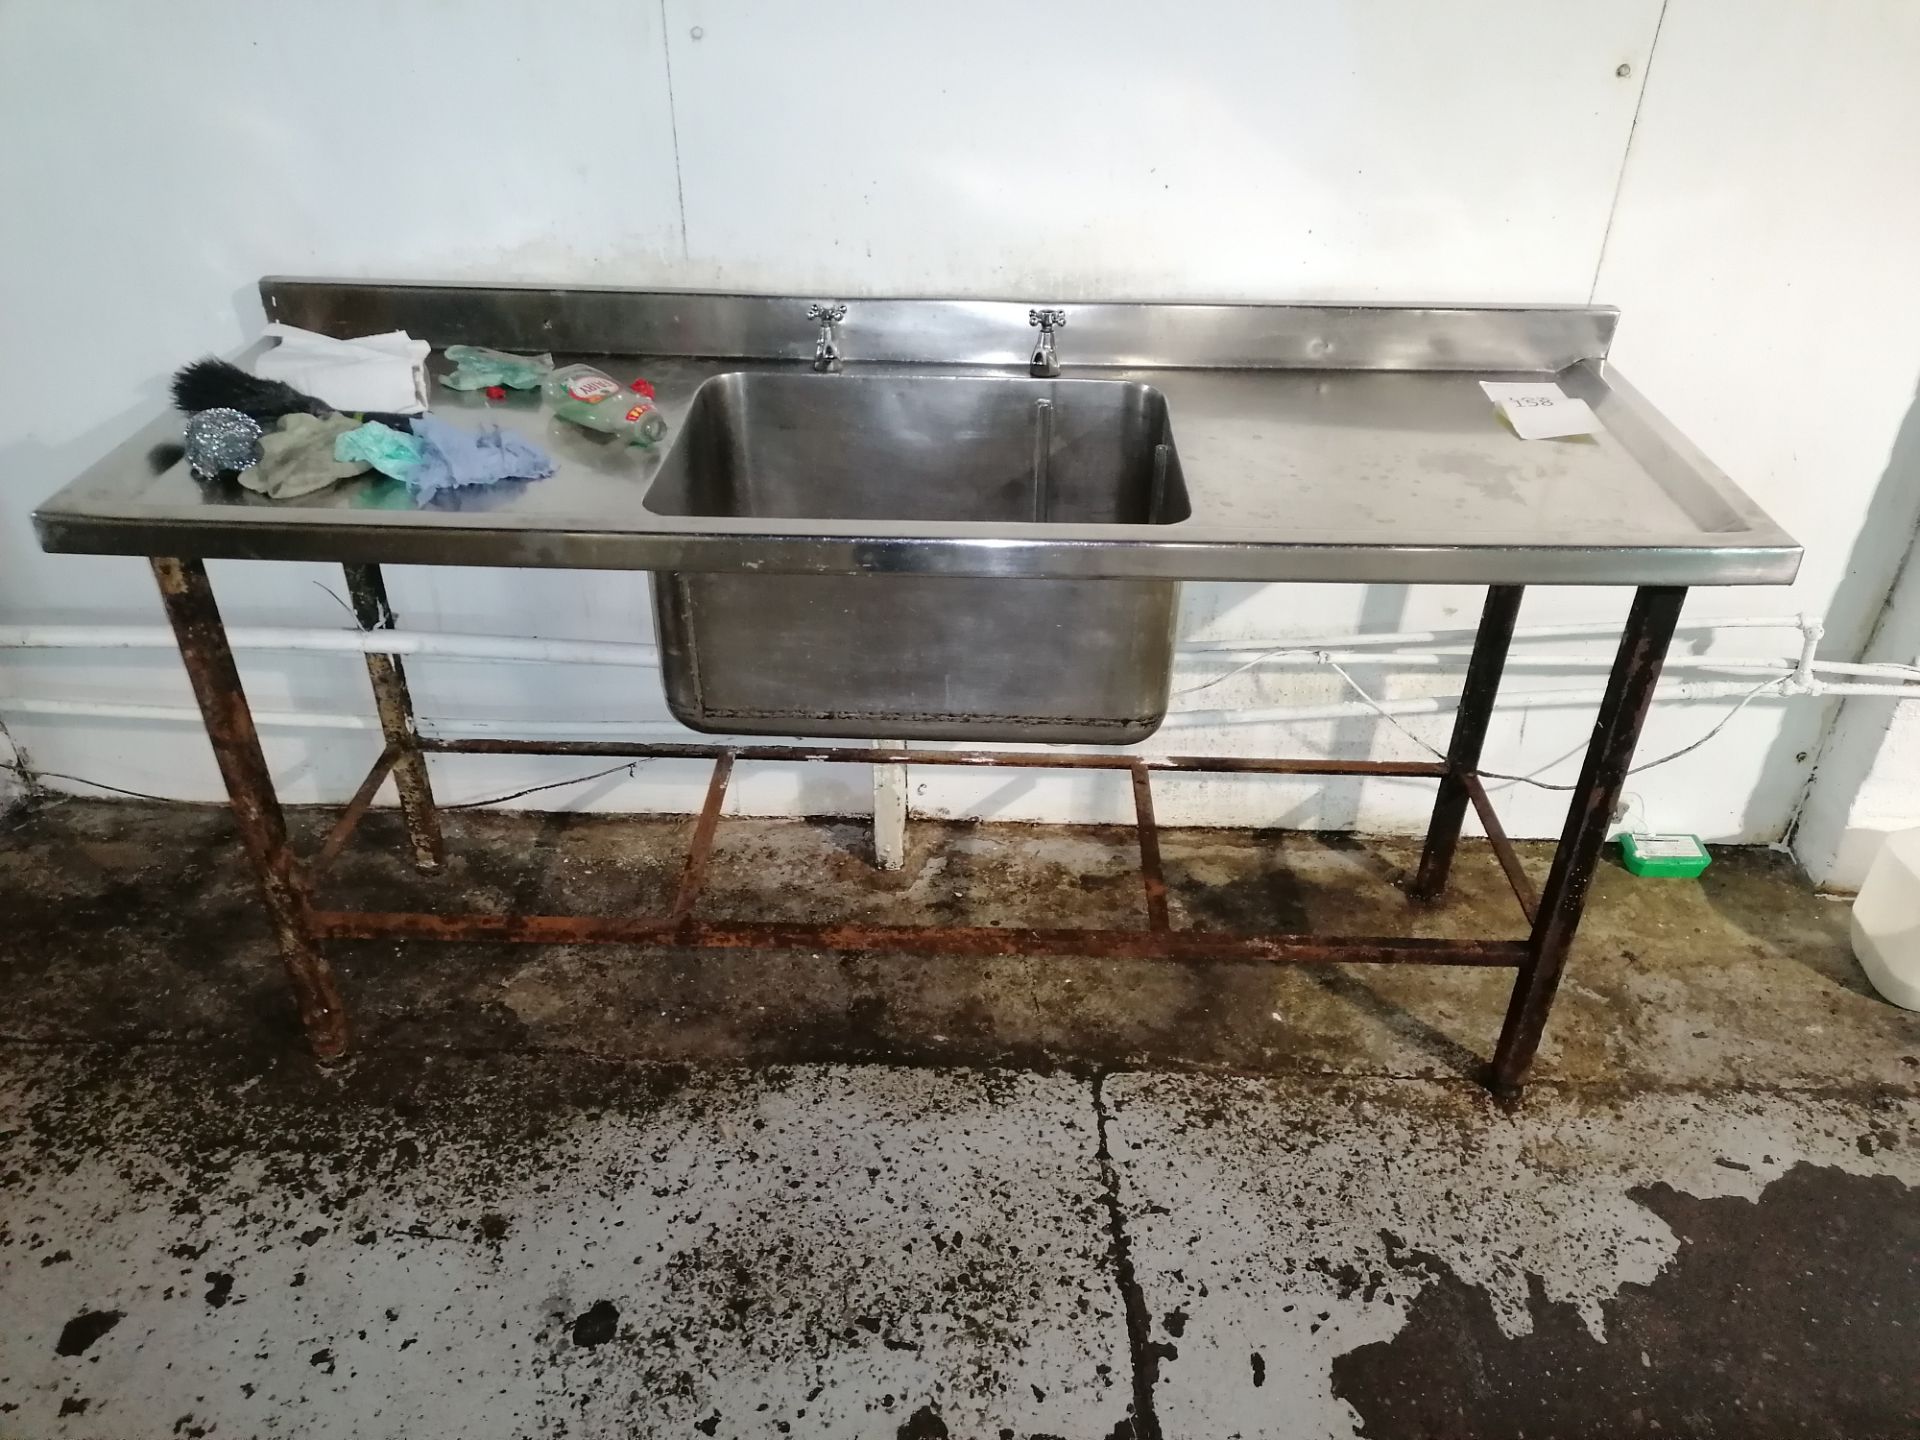 Stainless Steel Twin Drainer Sink Unit With Taps Length 182cm x Width 60cm x Height 86cm - Image 3 of 4